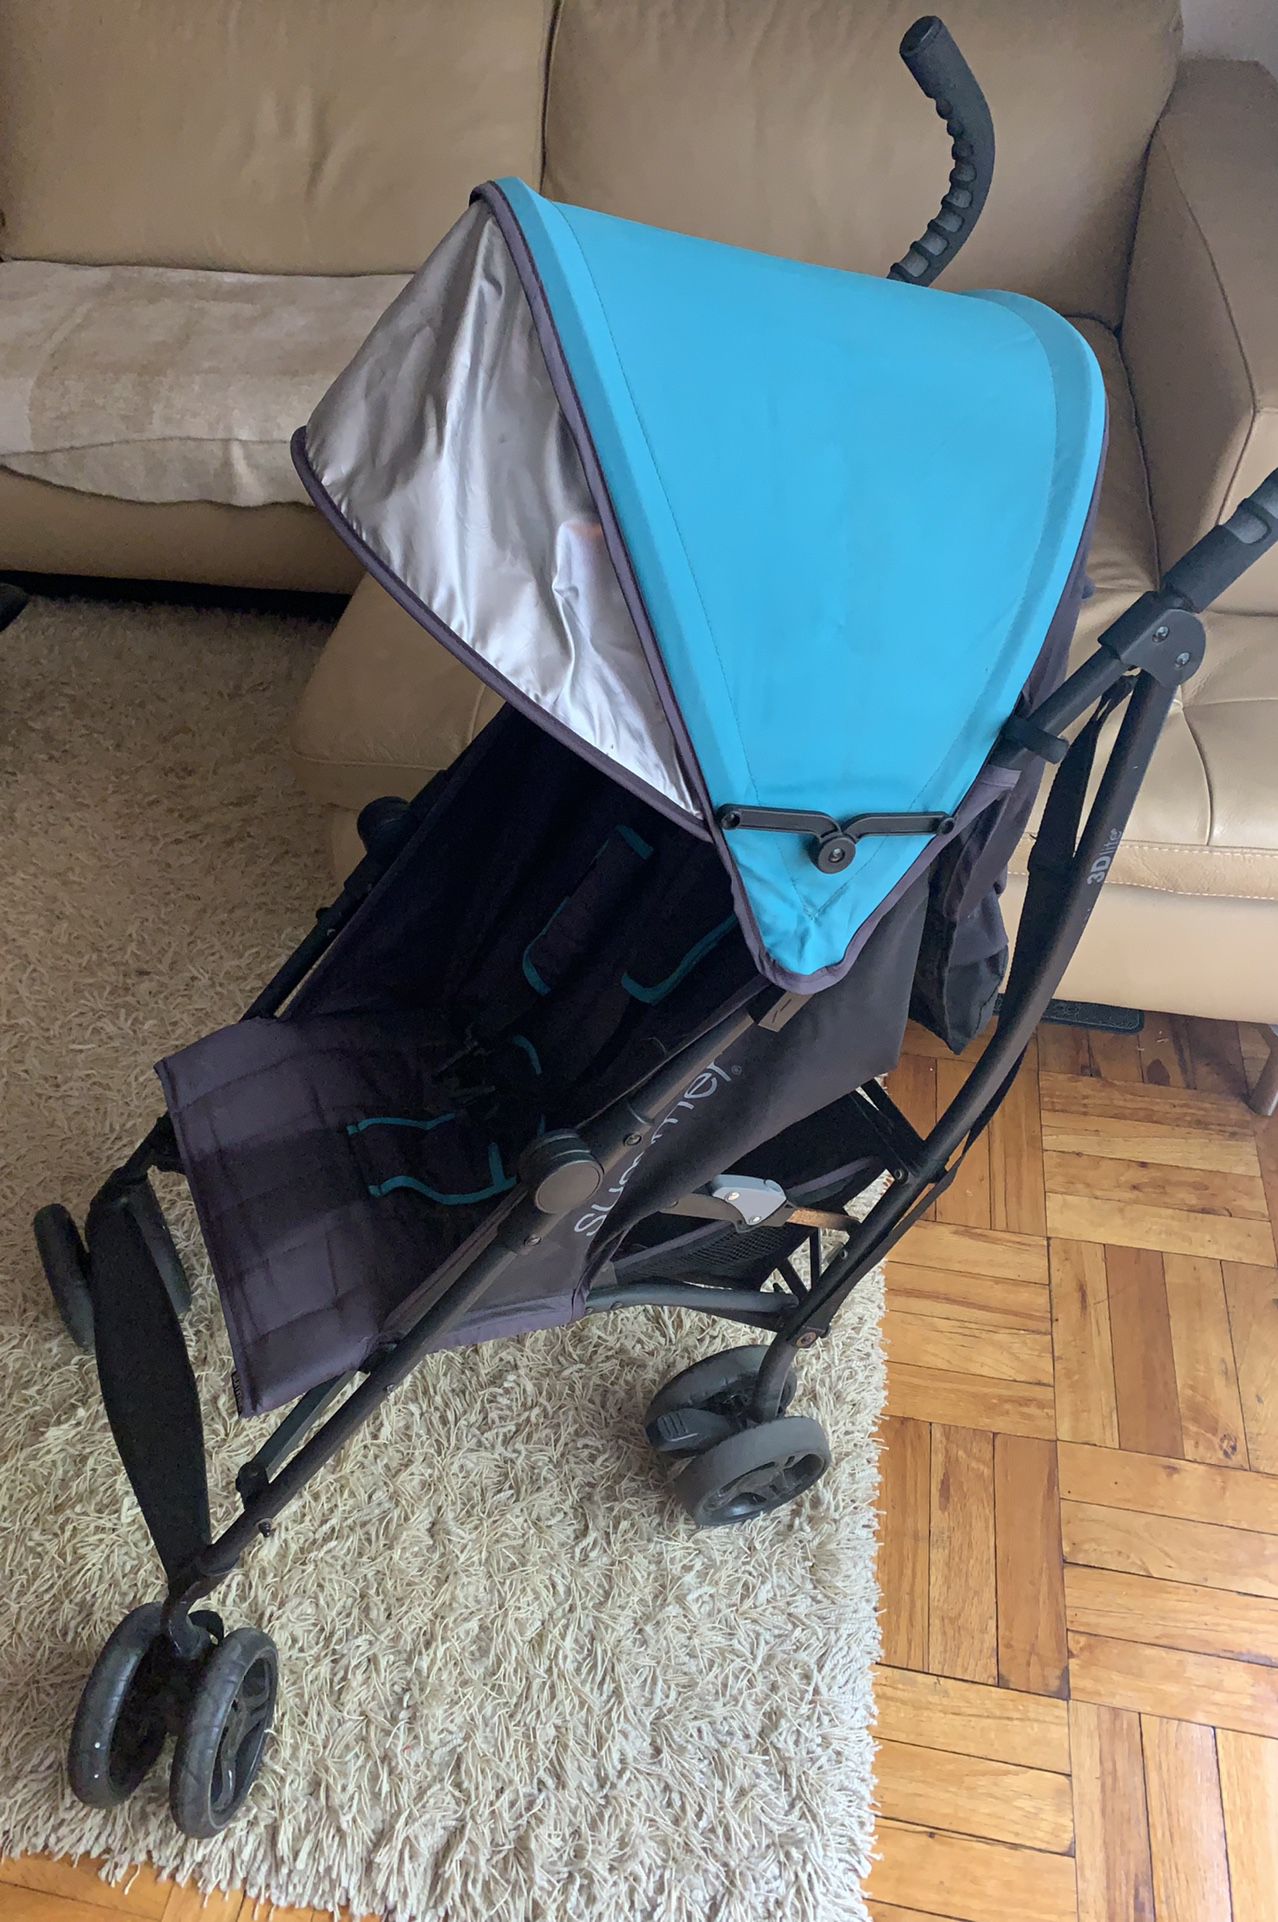 Summer Infant 3D Lite Stroller Amazon $140 P/up Brooklyn NY 